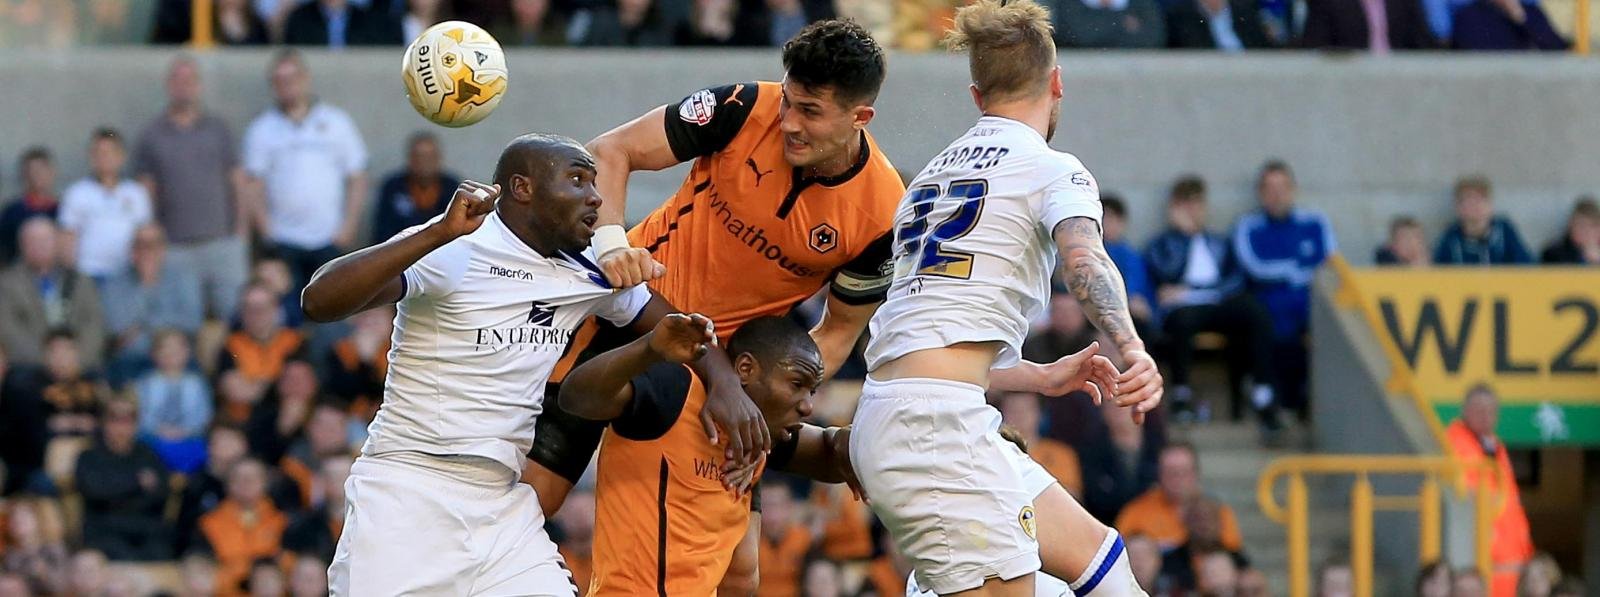 Should Wolves sell Danny Batth?